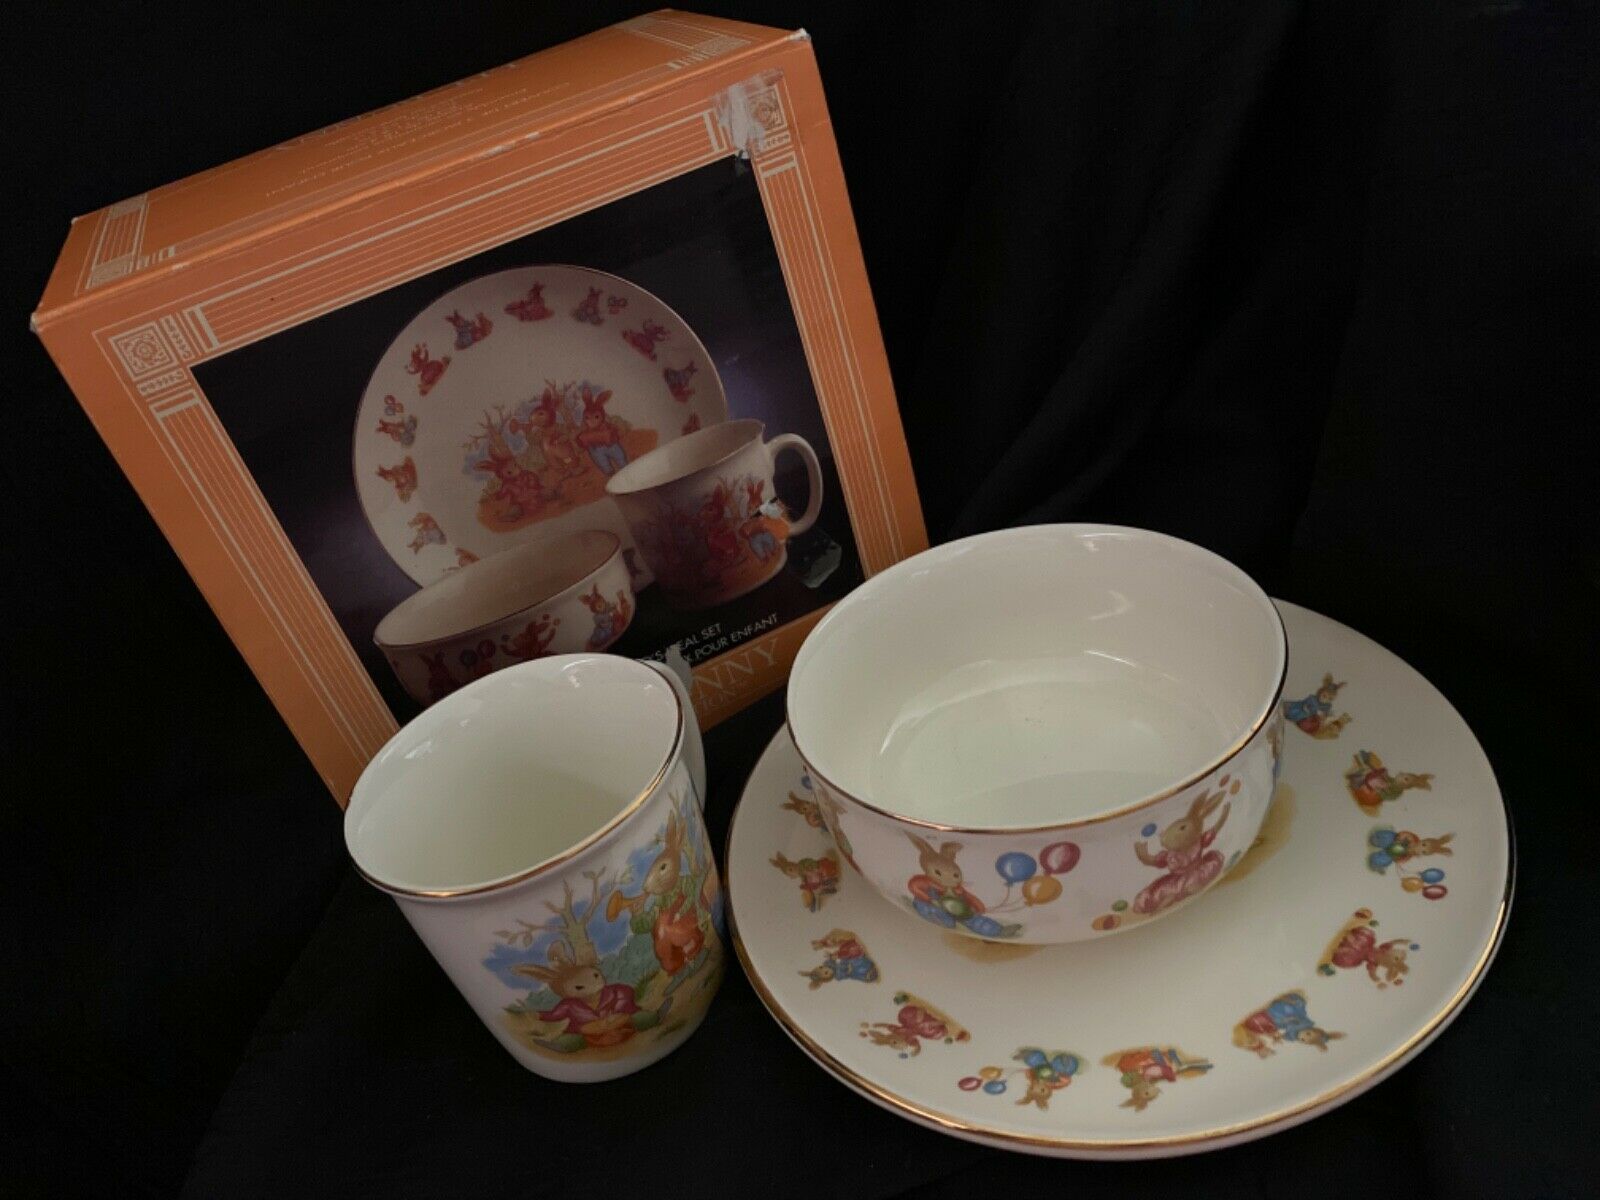 New—mount Clemens Pottery, Li’l Bunny Collection, 3 Piece Child’s Meal Set